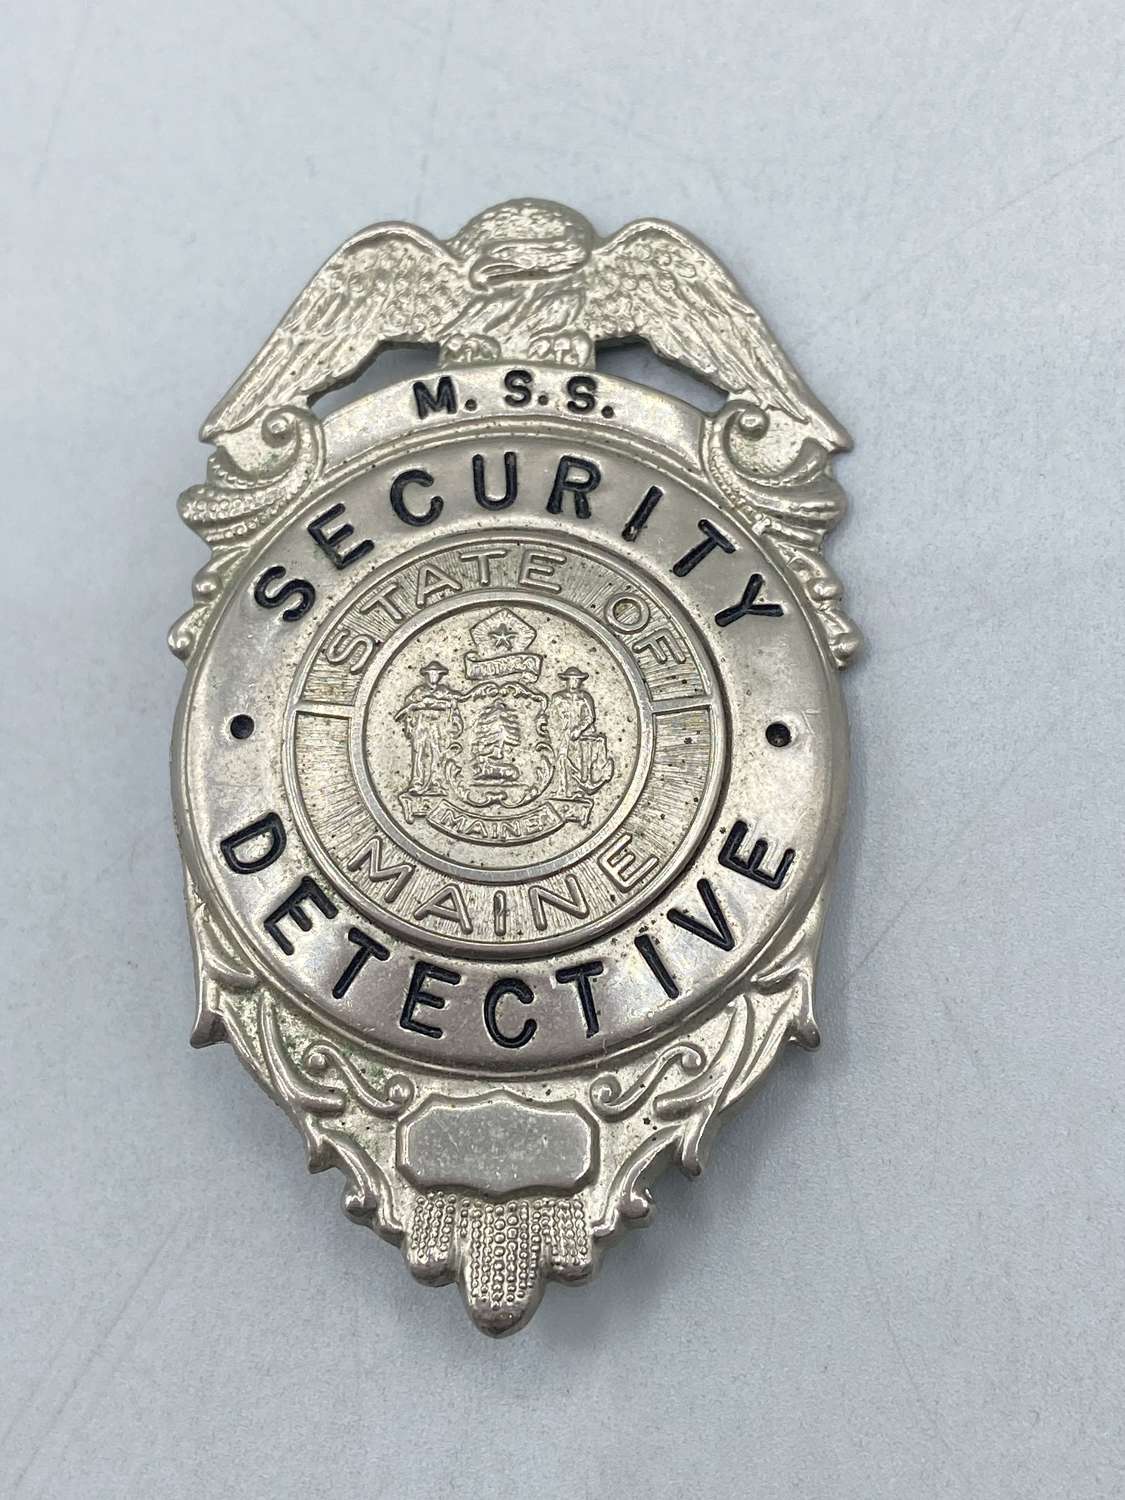 1940s United States M.S.S State Of Maine Security Detective Badge